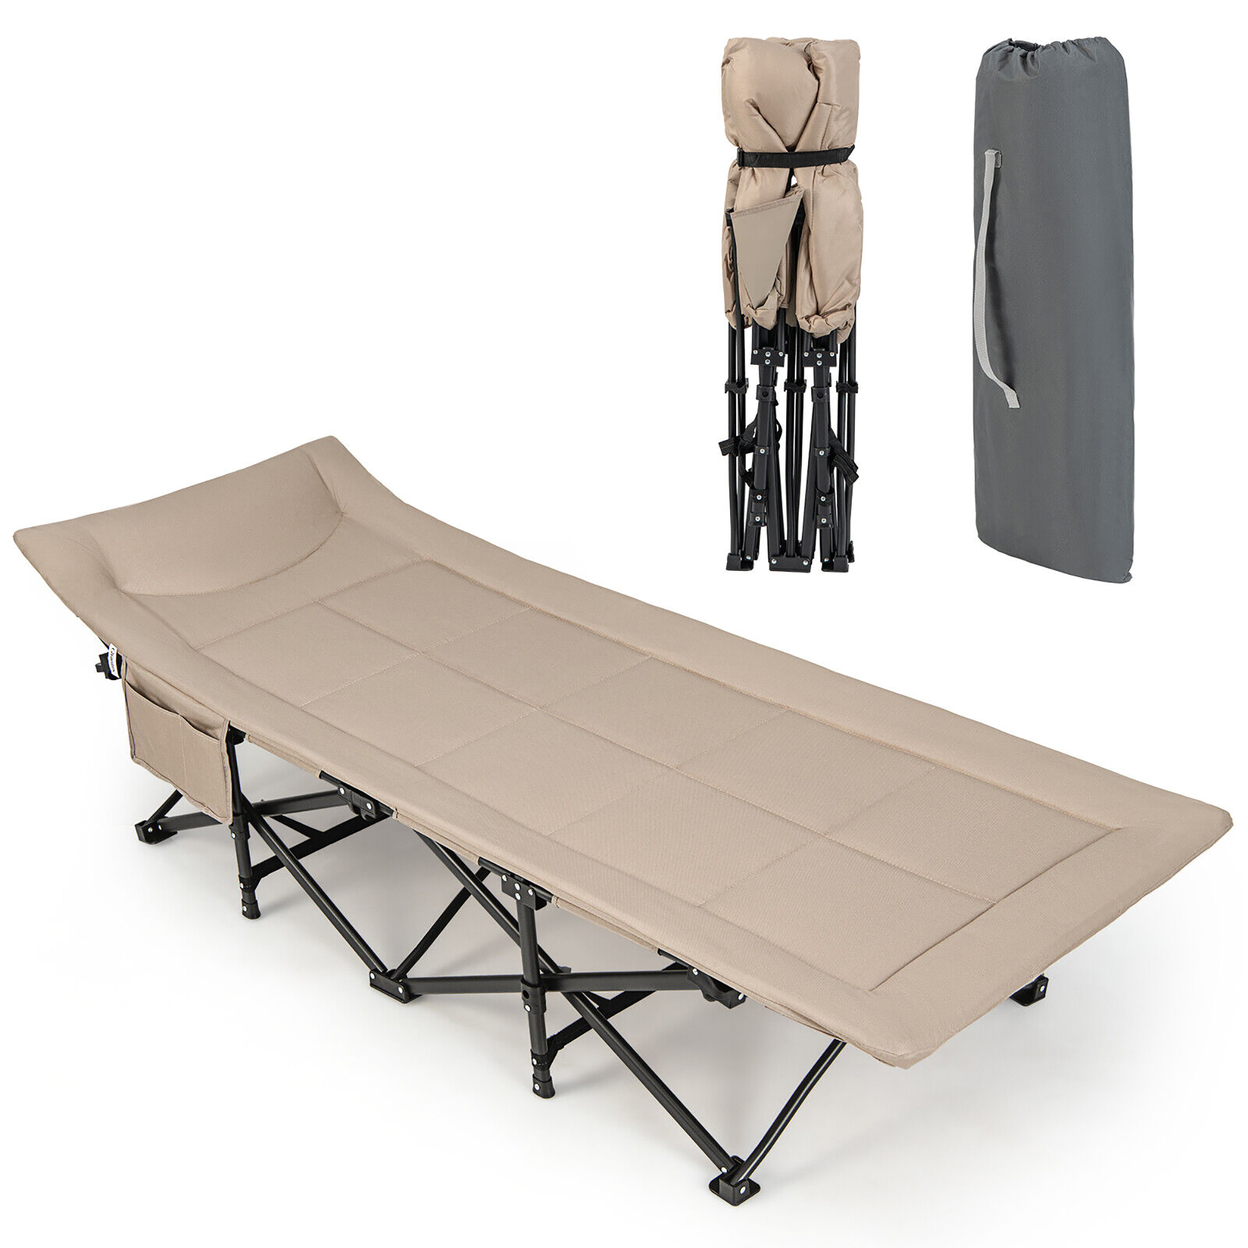 Folding Camping Cot Portable Tent Sleeping Bed With Cushion Headrest Carry Bag - Khaki